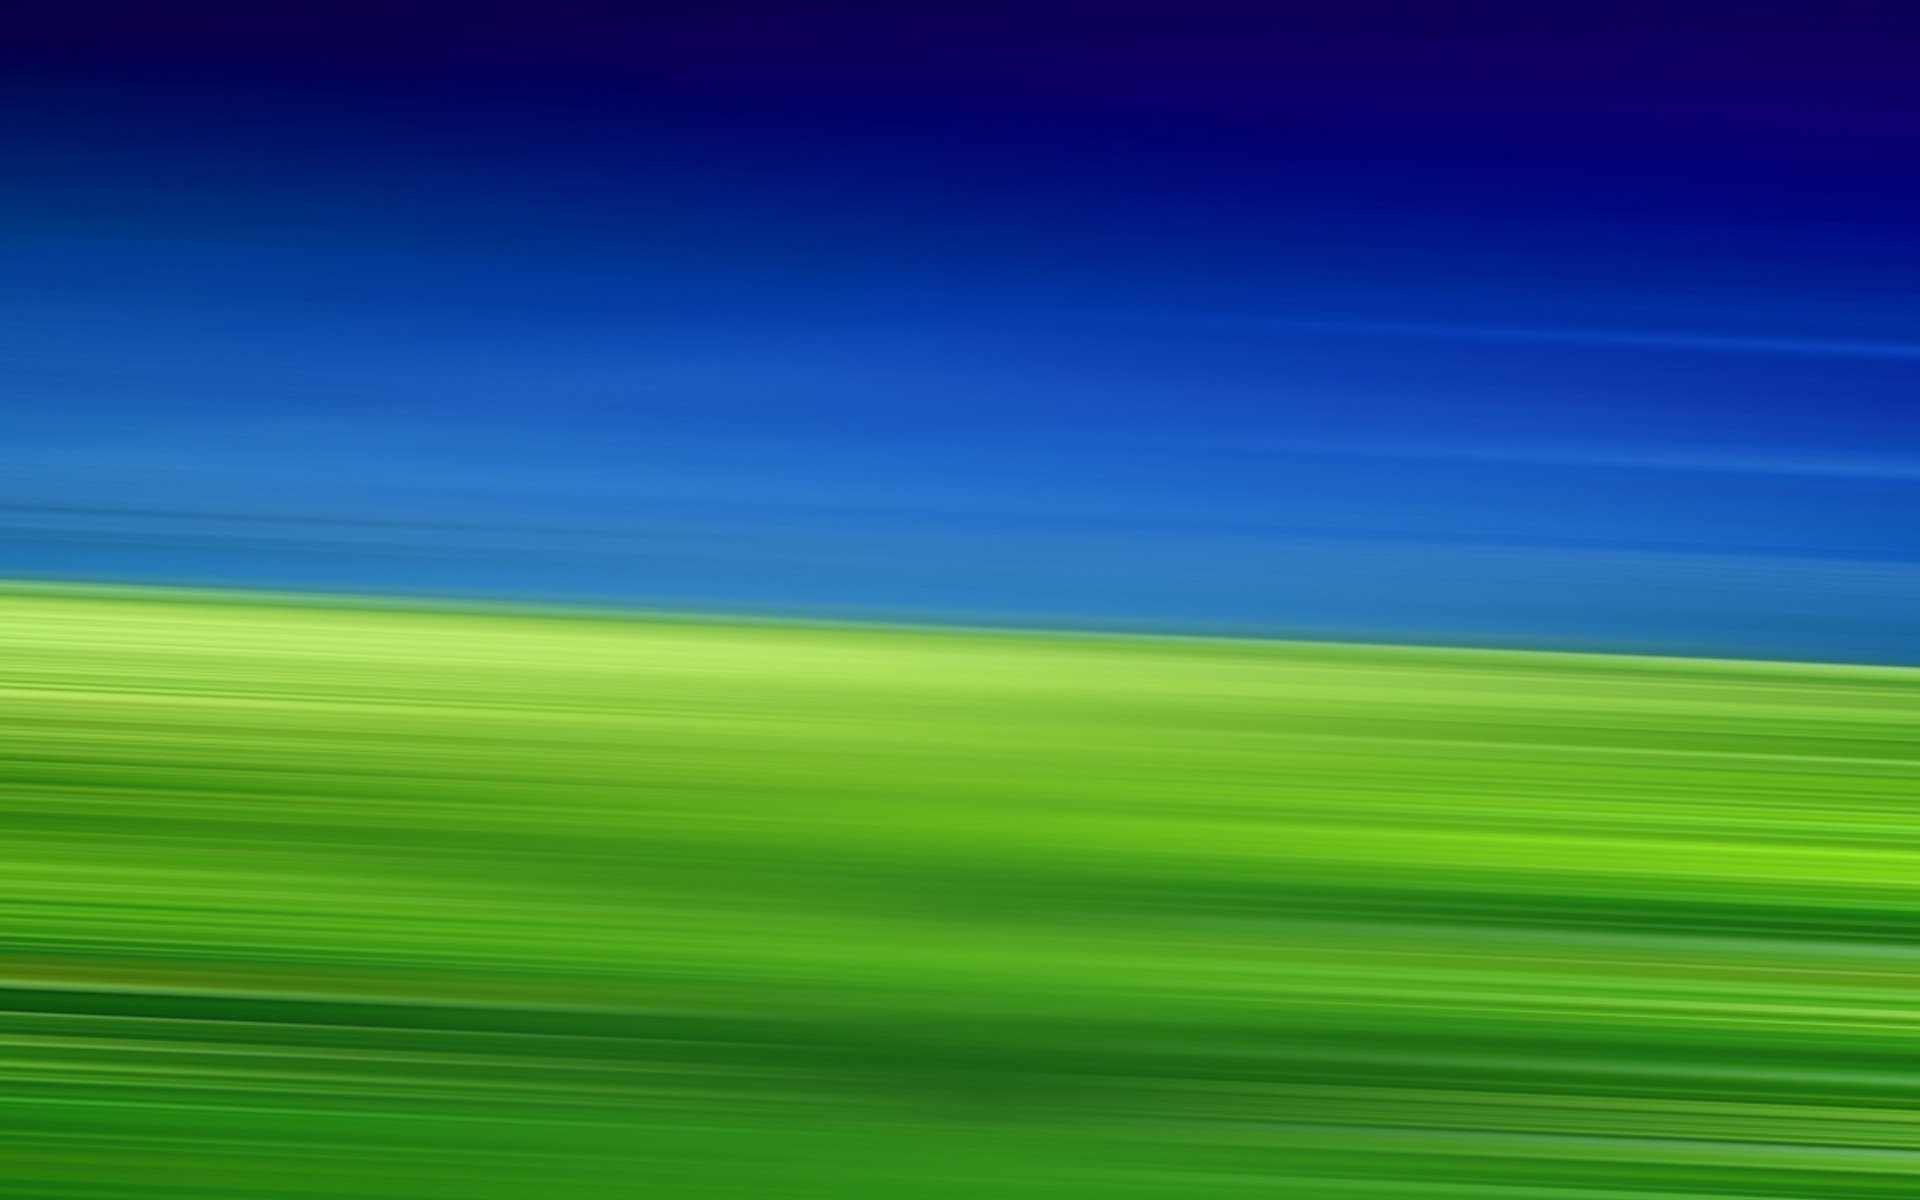 Blue And Green wallpaper   347794 1920x1200